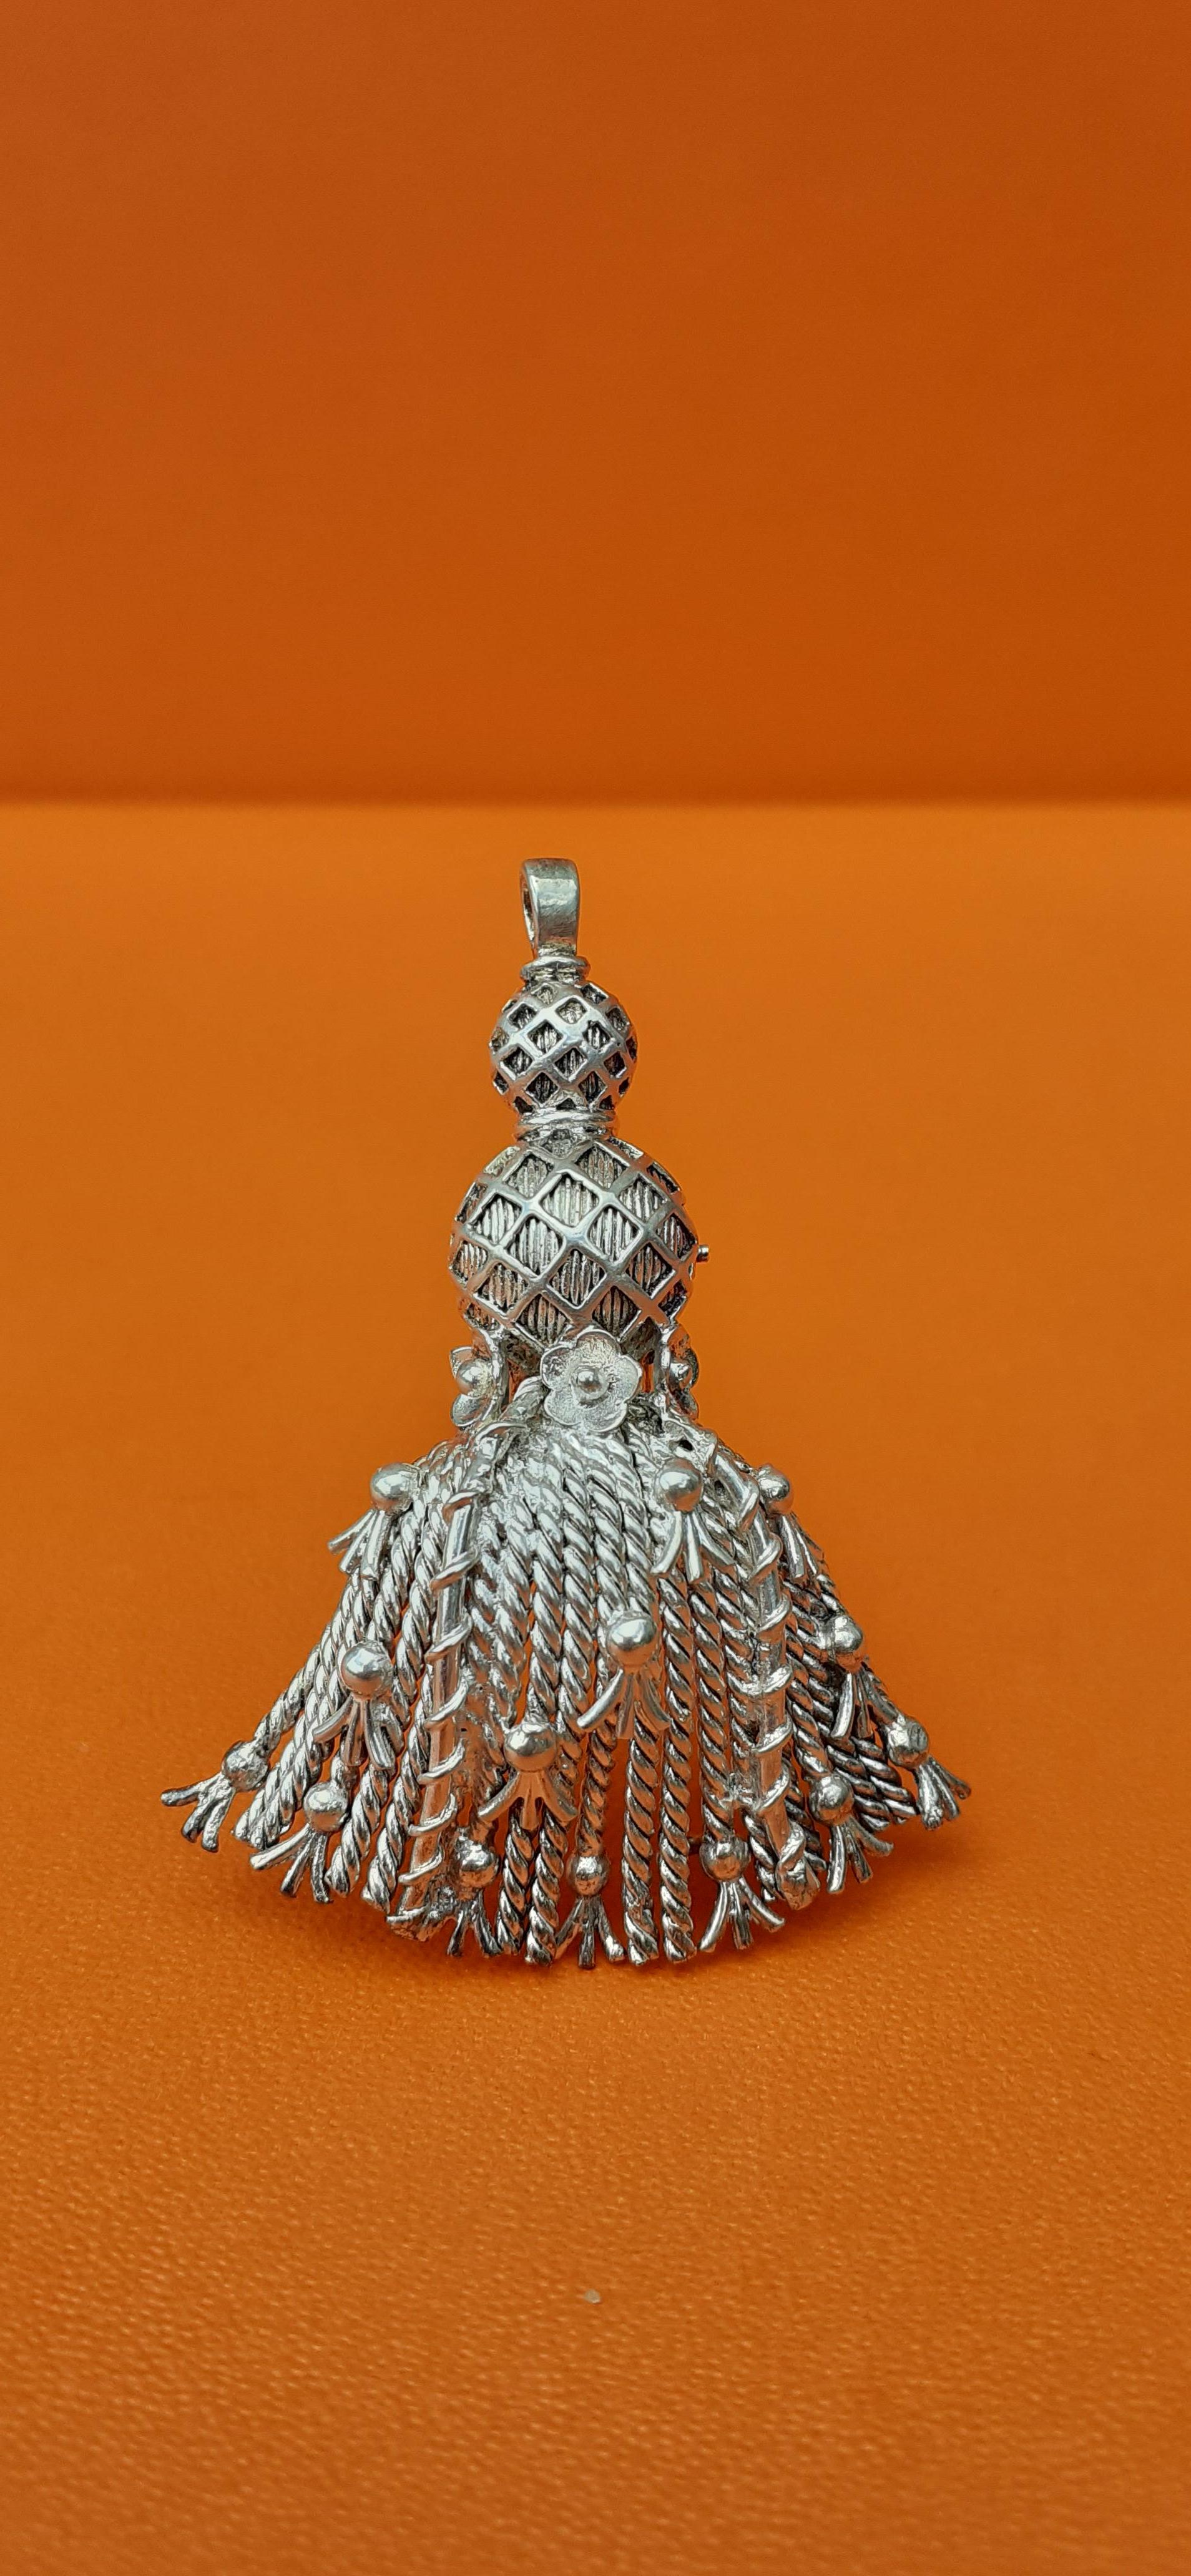 Rare and Gorgeous Authentic Hermès Lapel Pin

In shape of a Tassel (Passementerie)

Made of Silver (800/1000) 

Vintage Item 

Pompom composed of 2 half spheres,  twisted silver threads, decorated with small flowers (everything is fixed, not